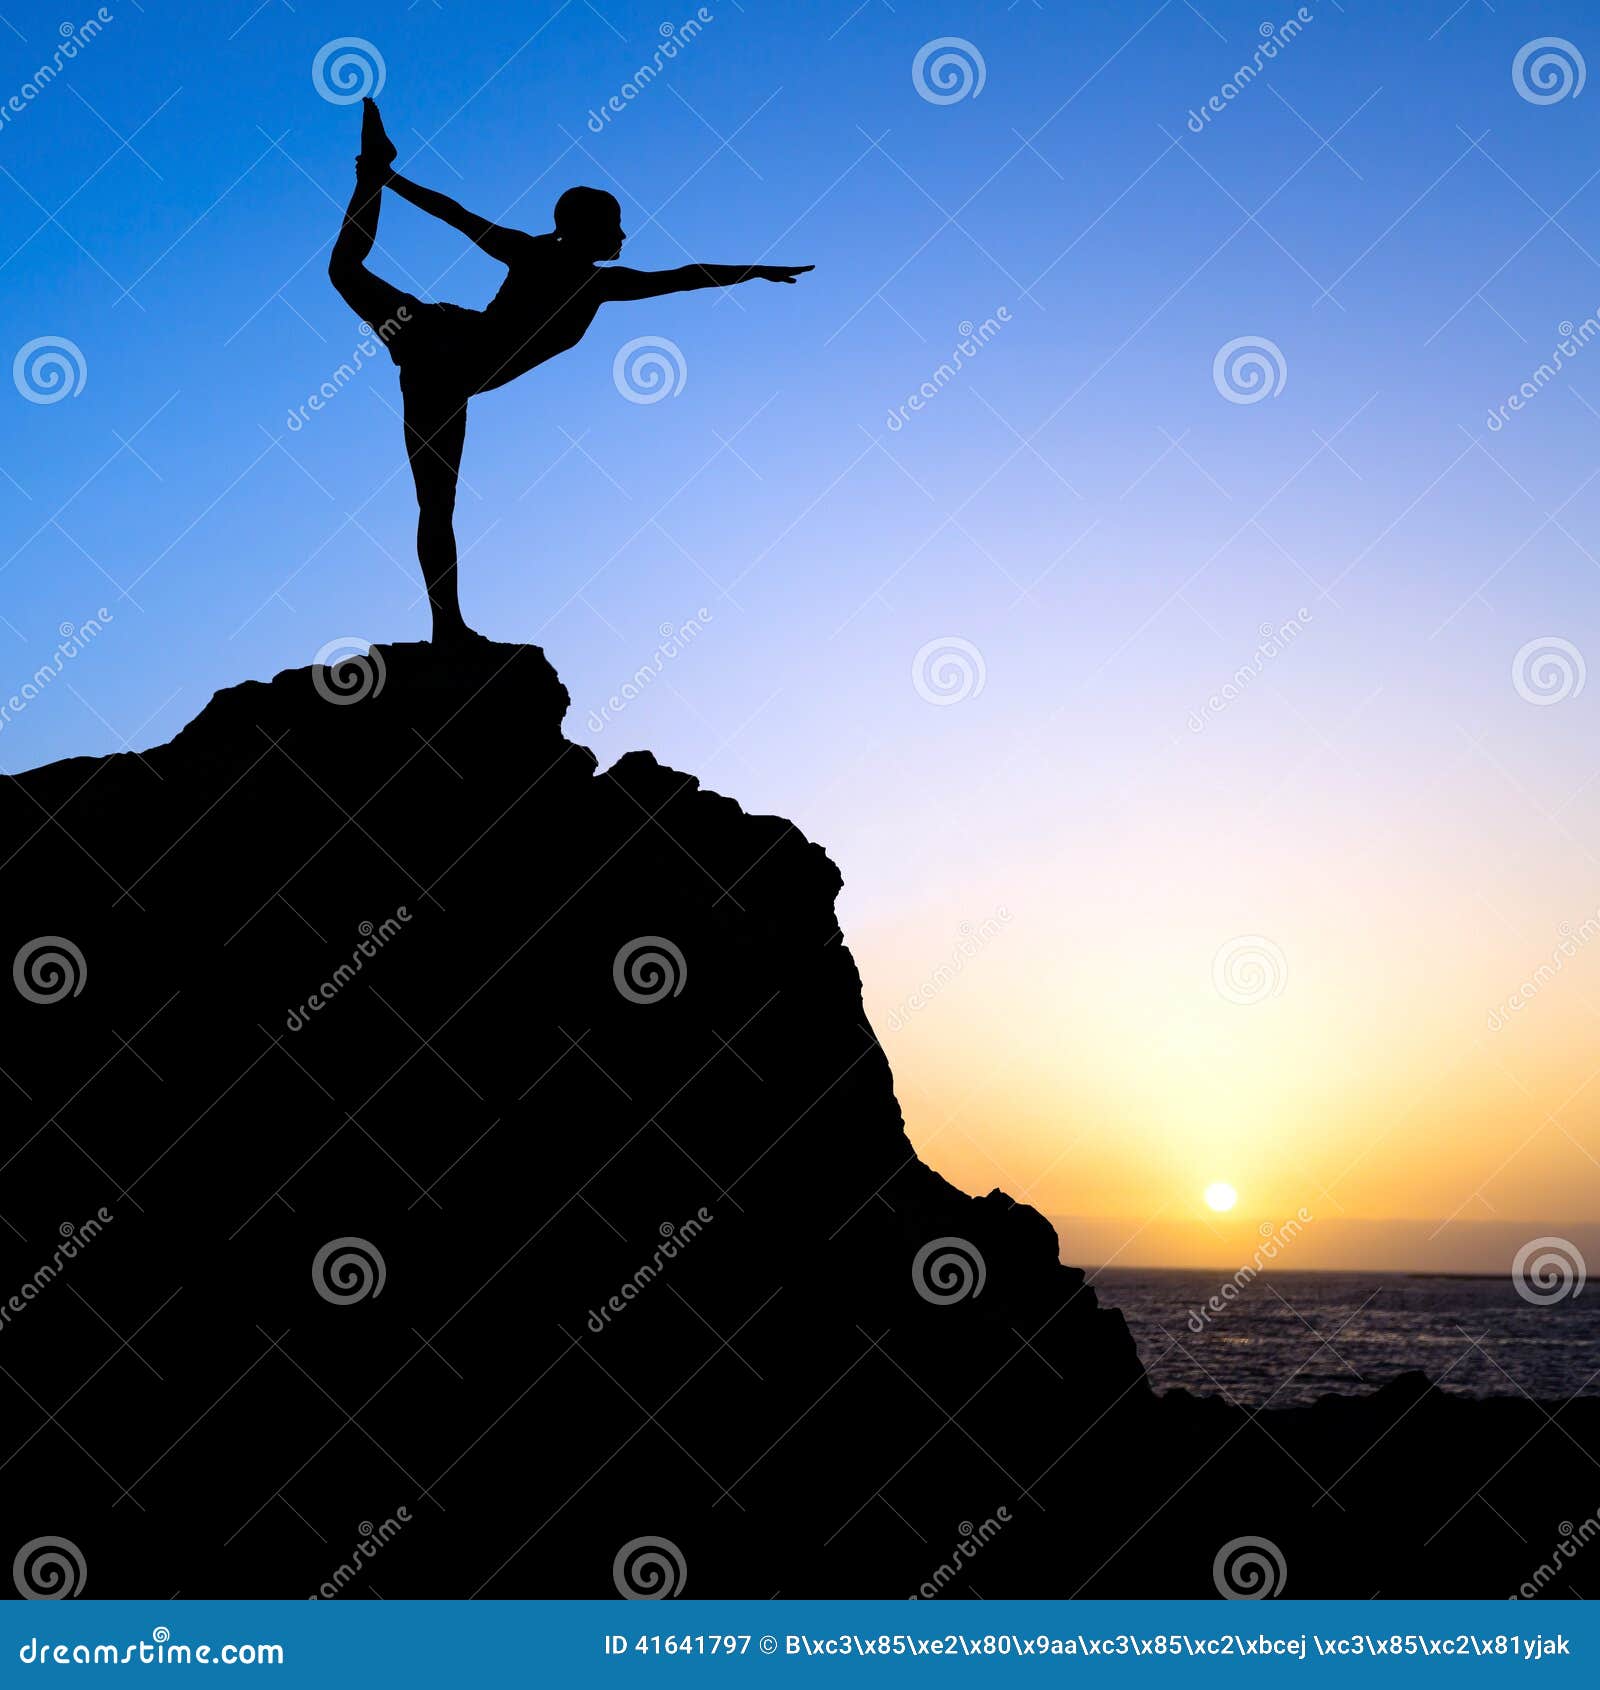 Meditation on sunset sky background. Young active woman in yoga